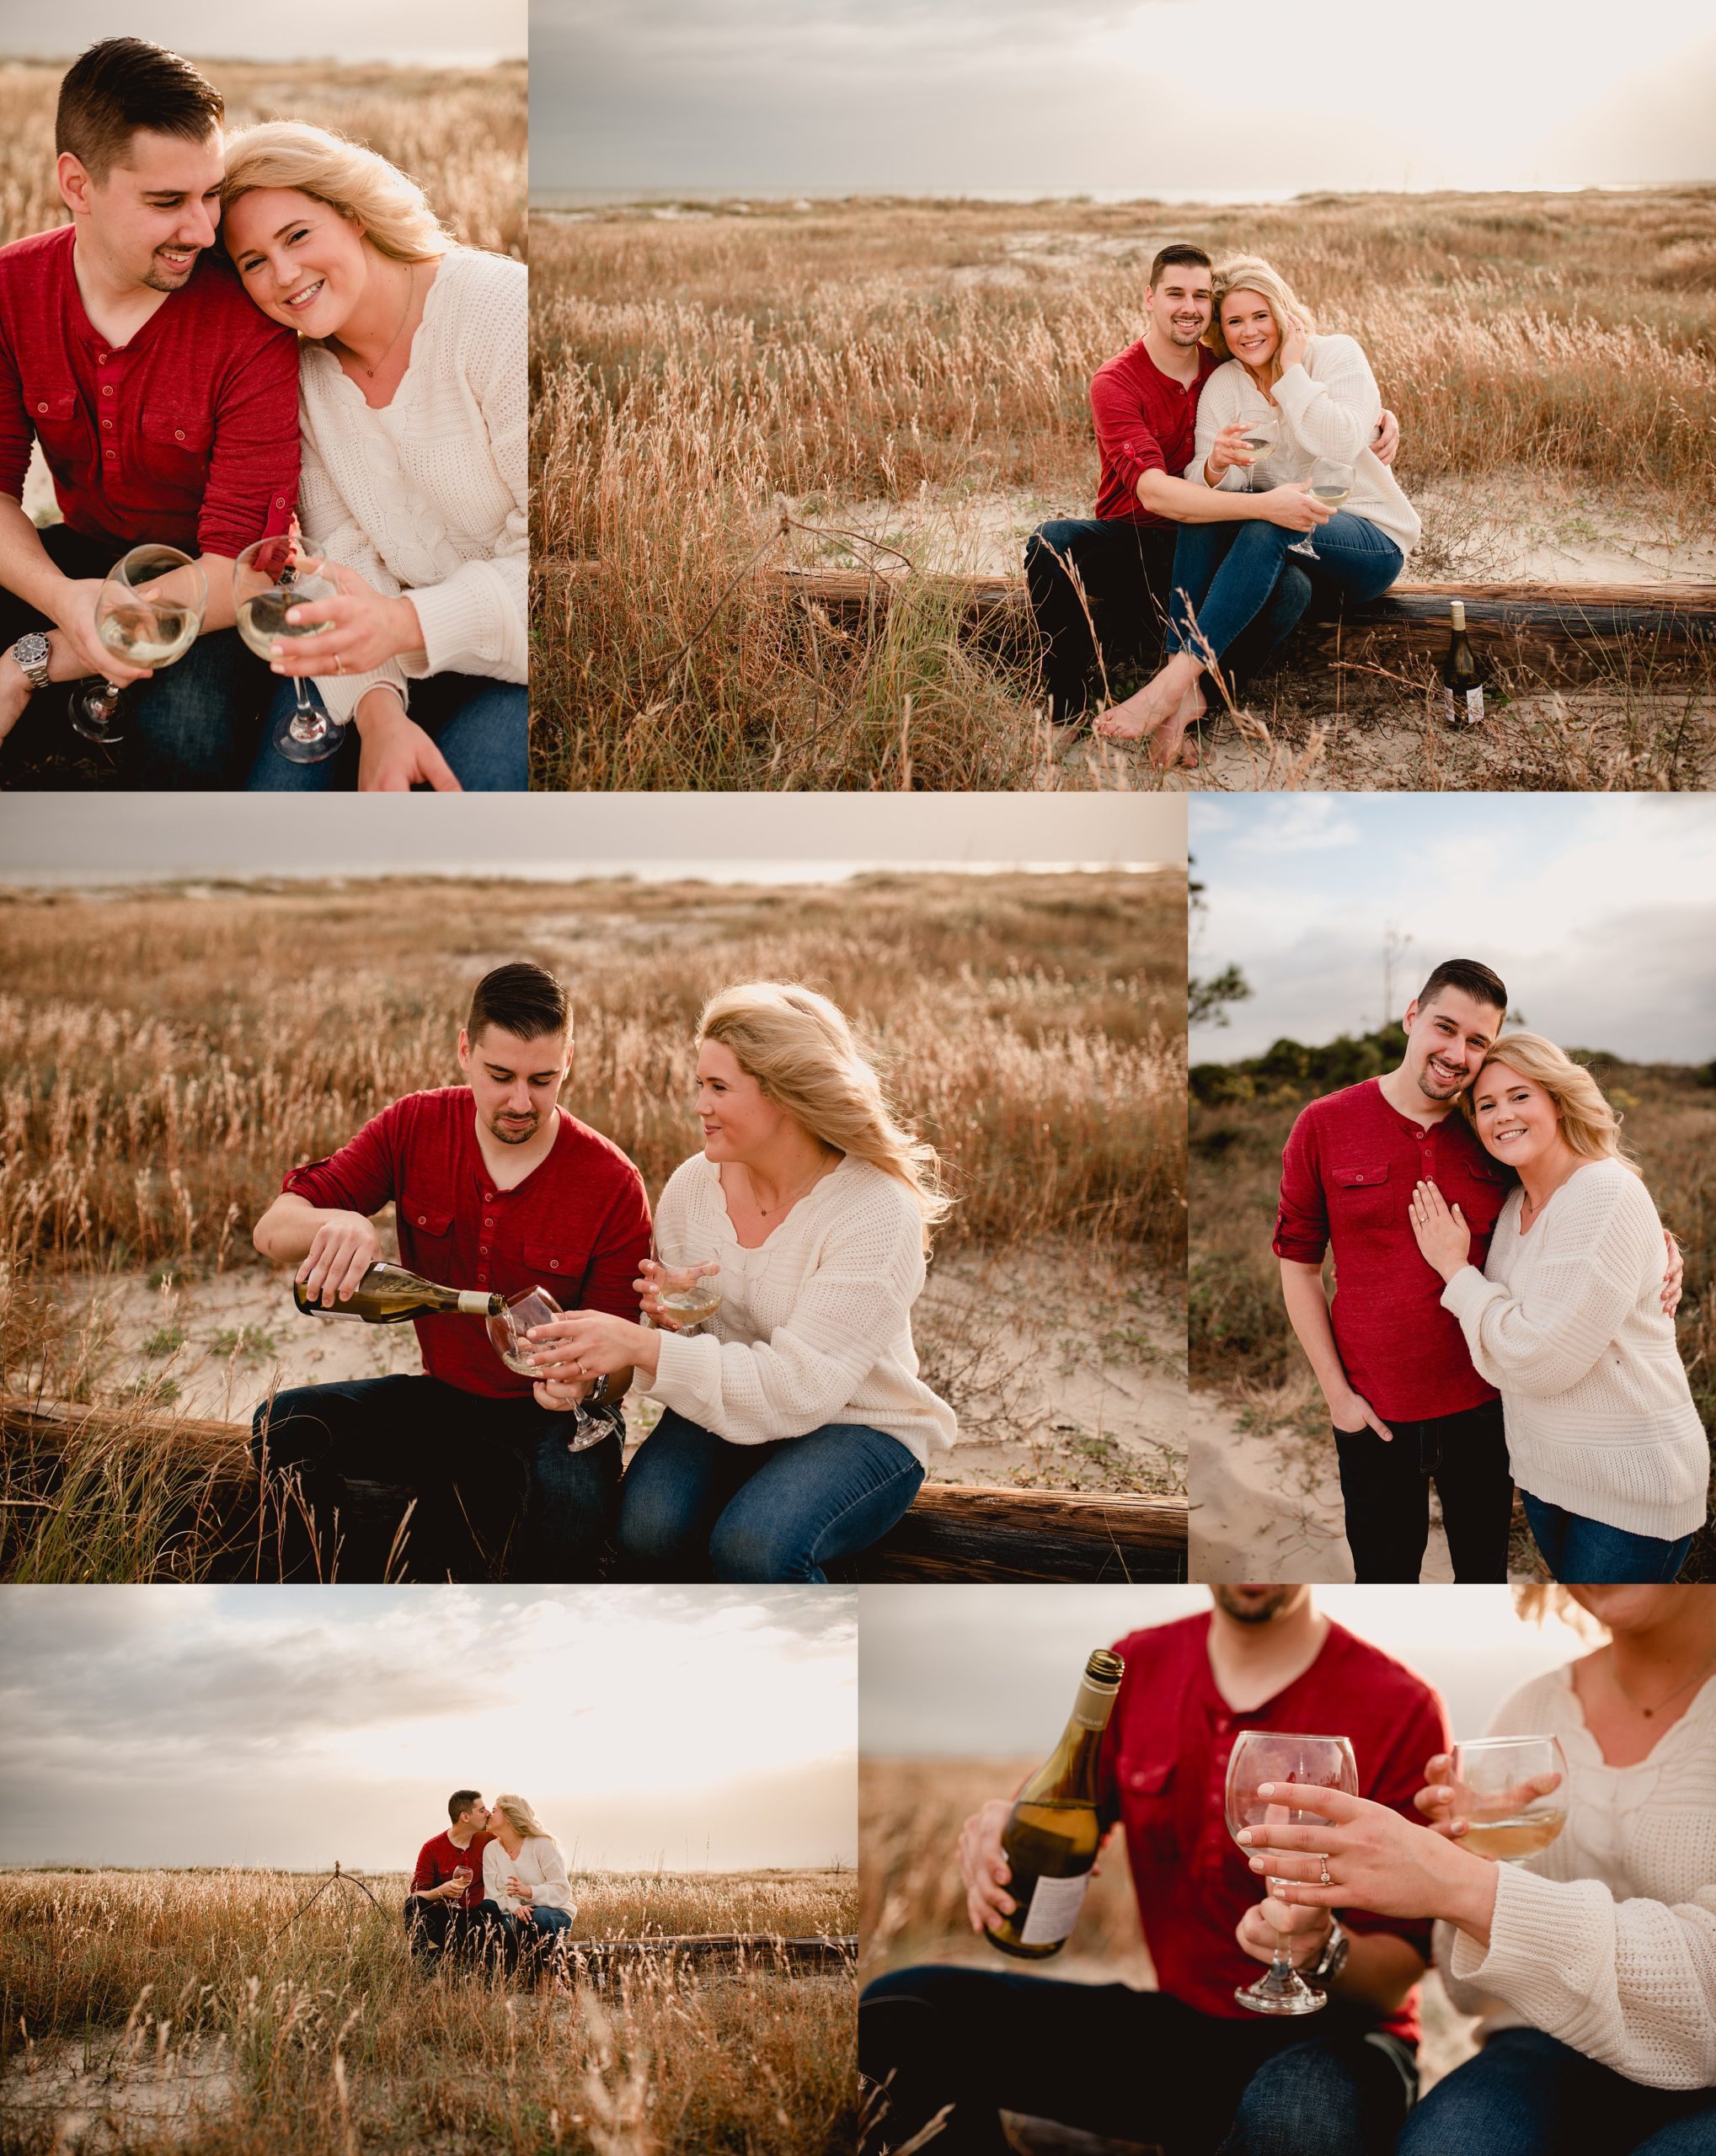 Cute poses for couples on the beach. Couple drinks wine during engagement session.